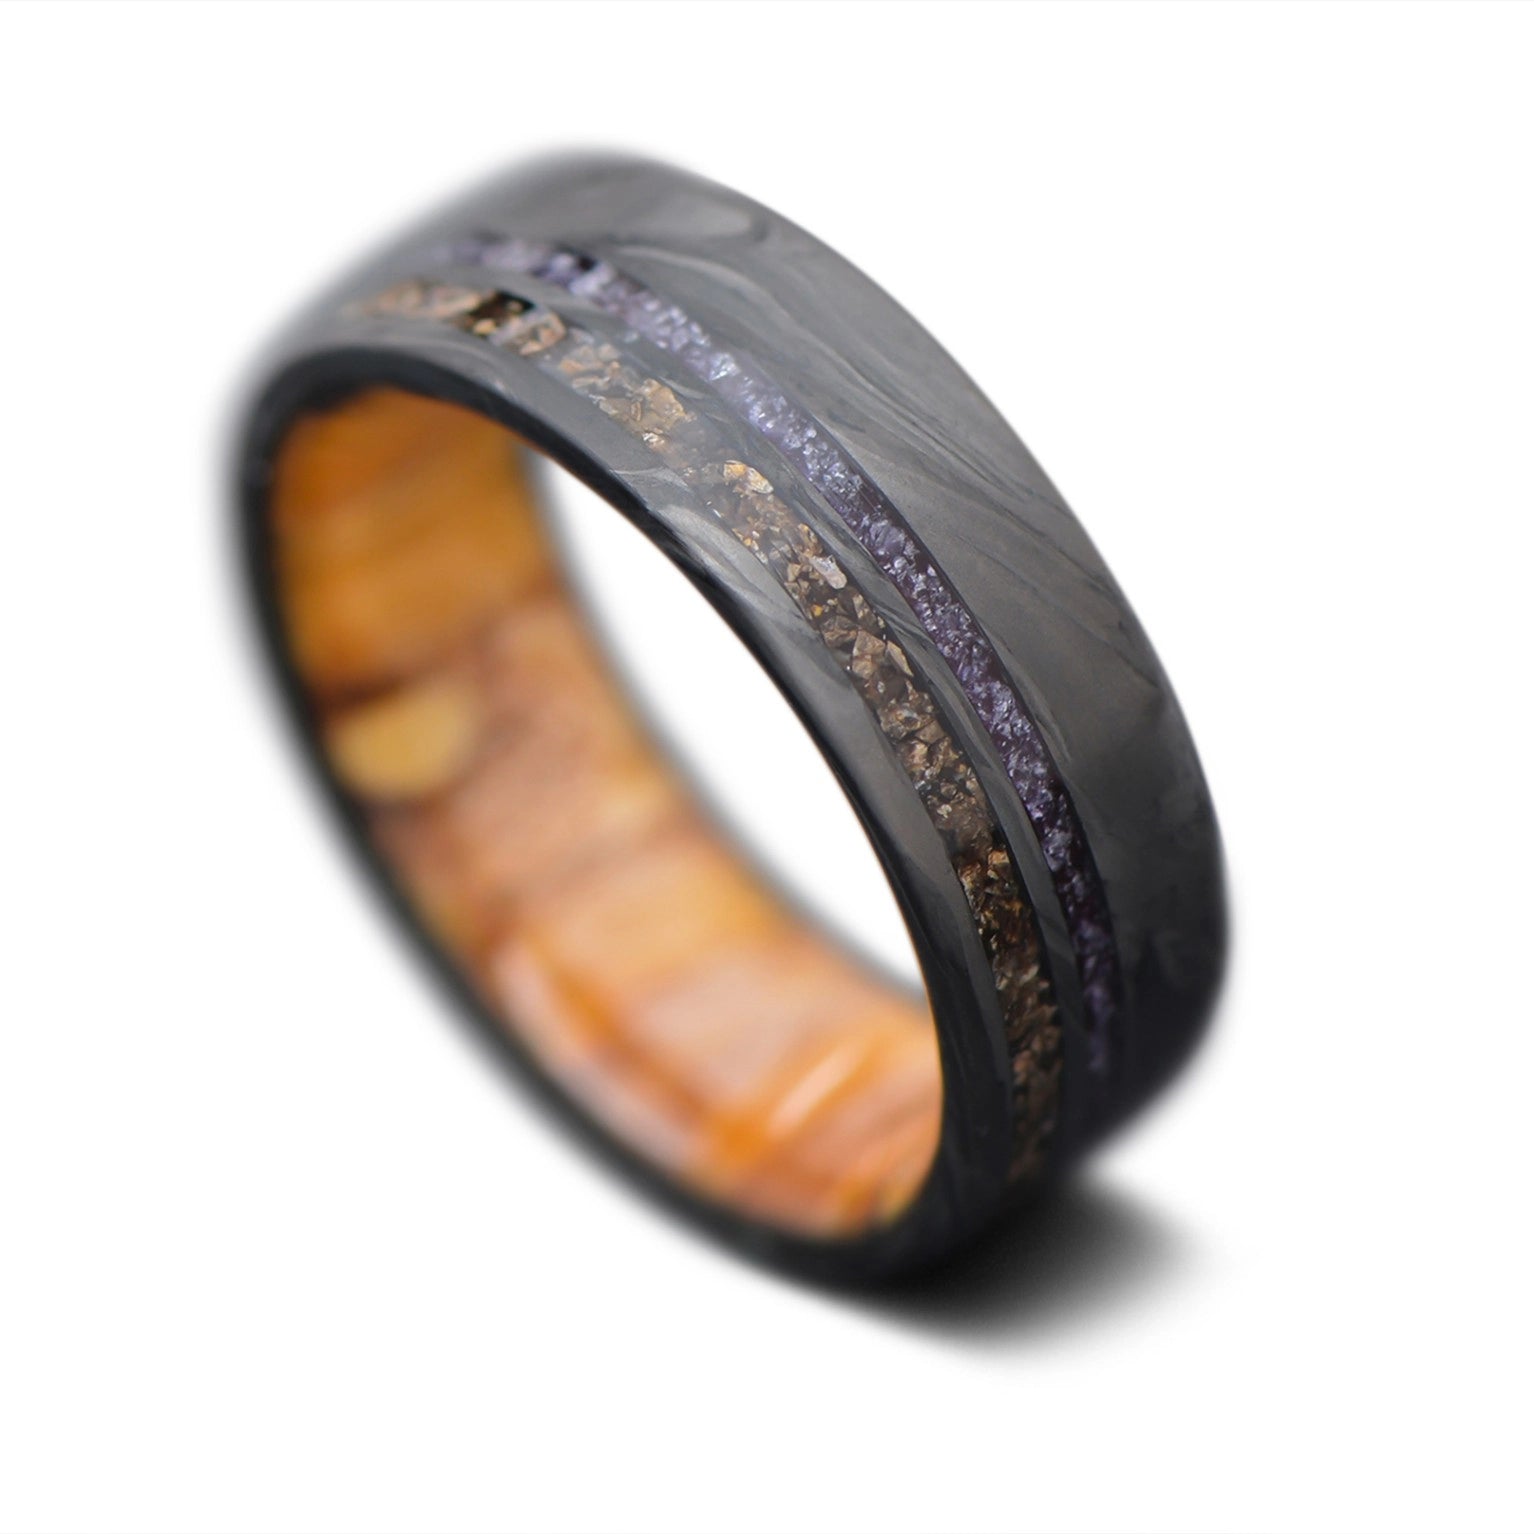 CarbonForged Core Ring with Amethyst, Crushed T-Rex inlay and Silver Spalted Birch inner sleeve, 8mm -THE ODYSSEY